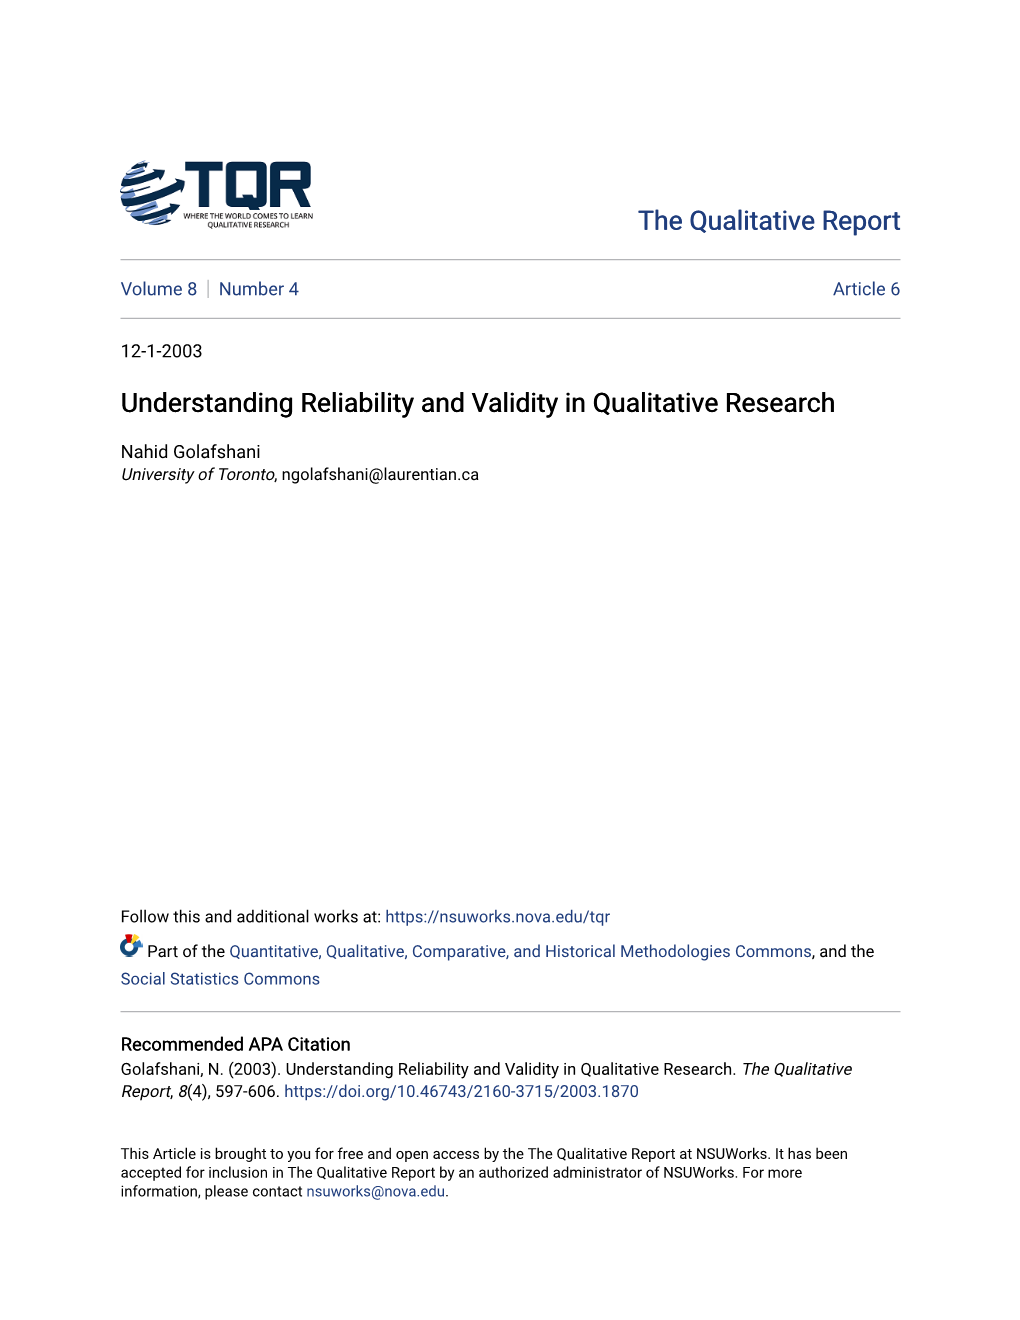 Understanding Reliability and Validity in Qualitative Research